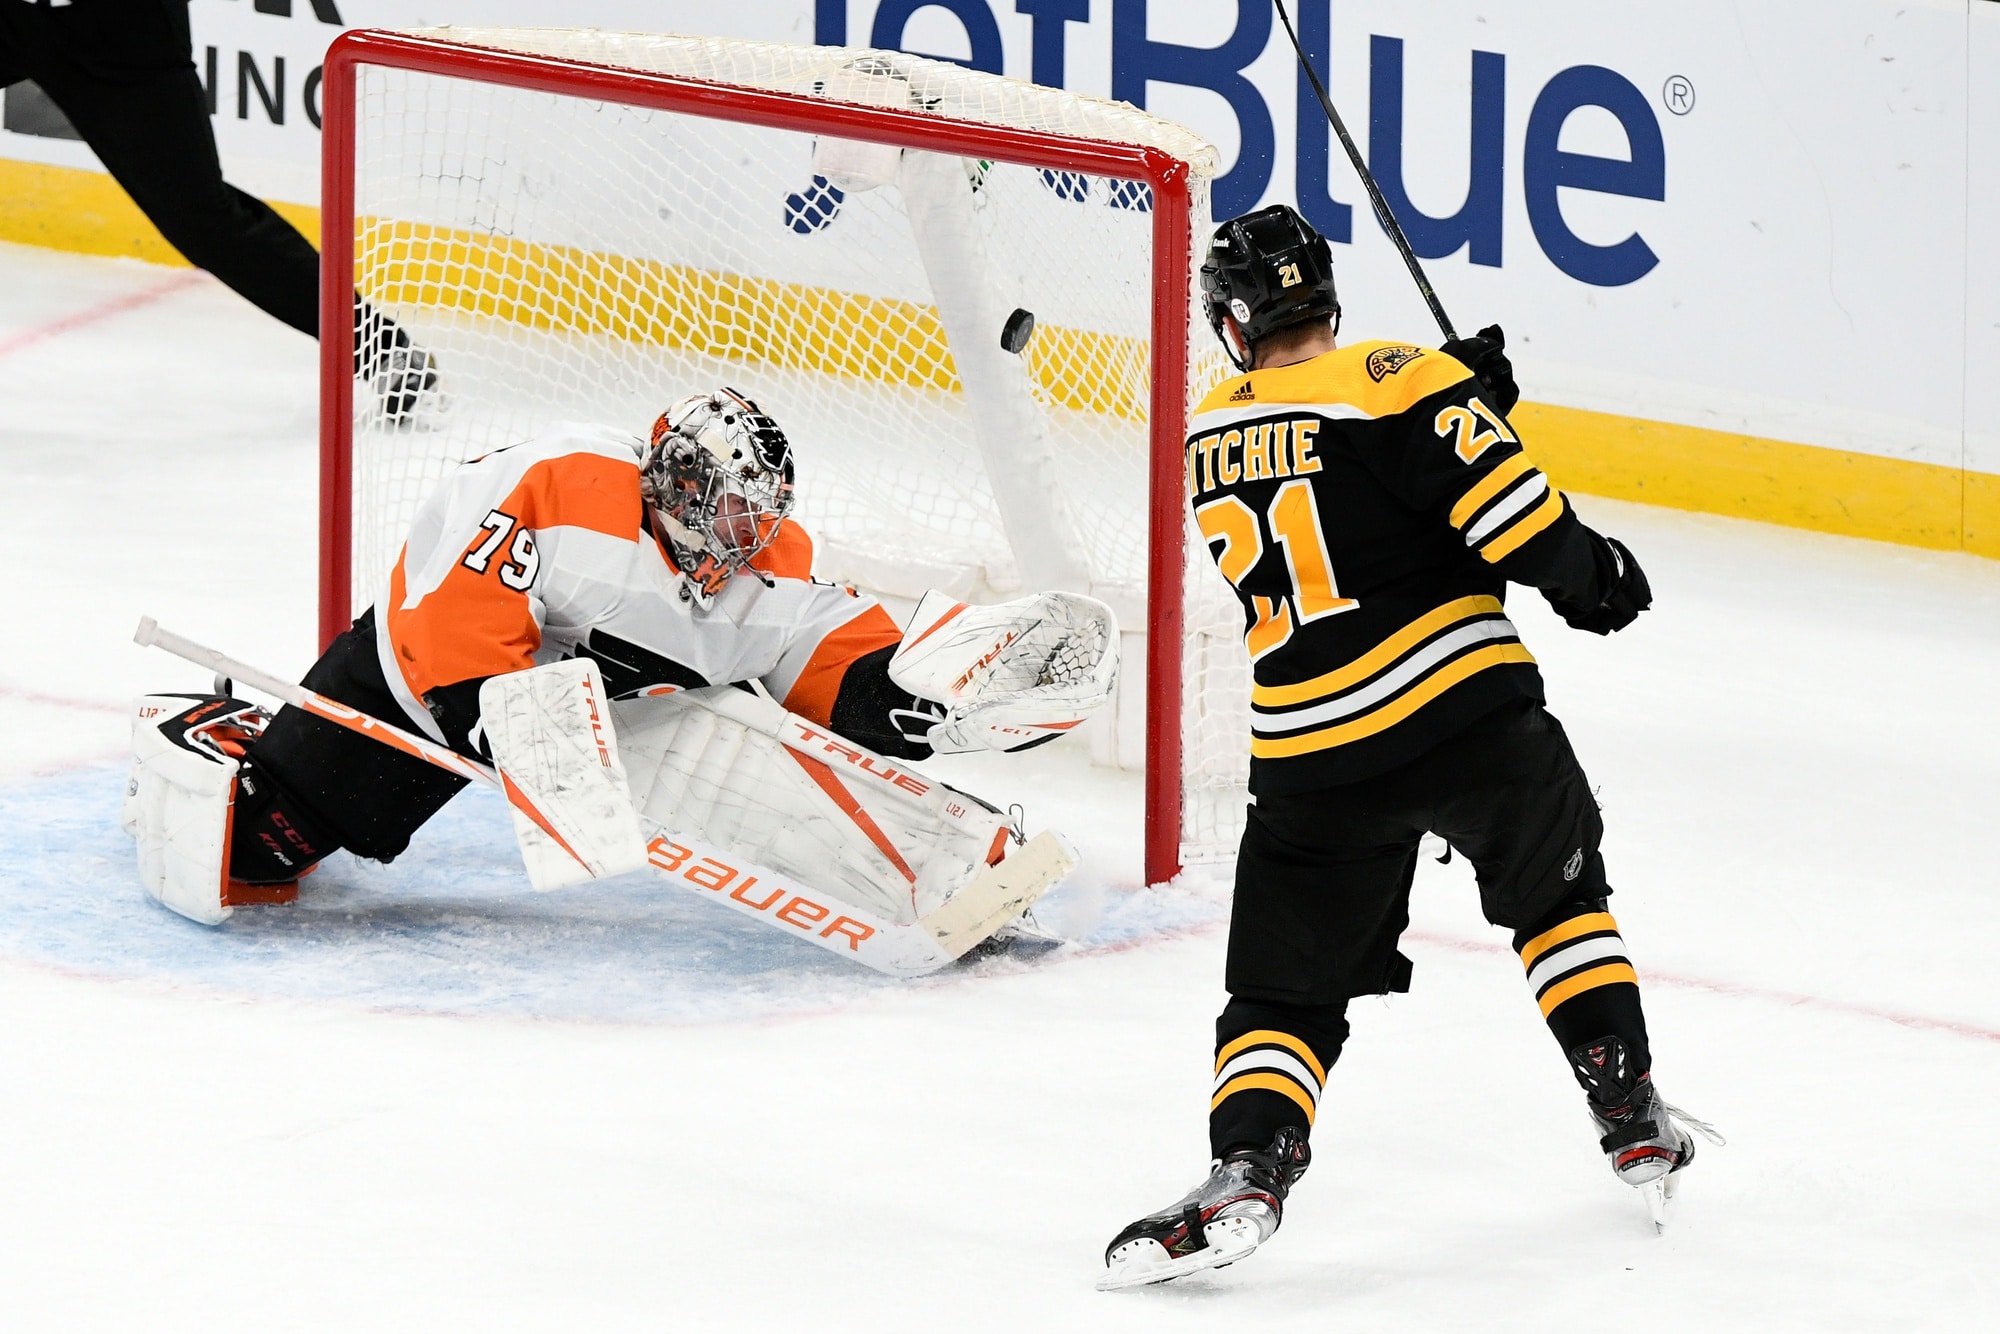 Missing a Gear: Observations from Bruins 5, Flyers 4 (SO)